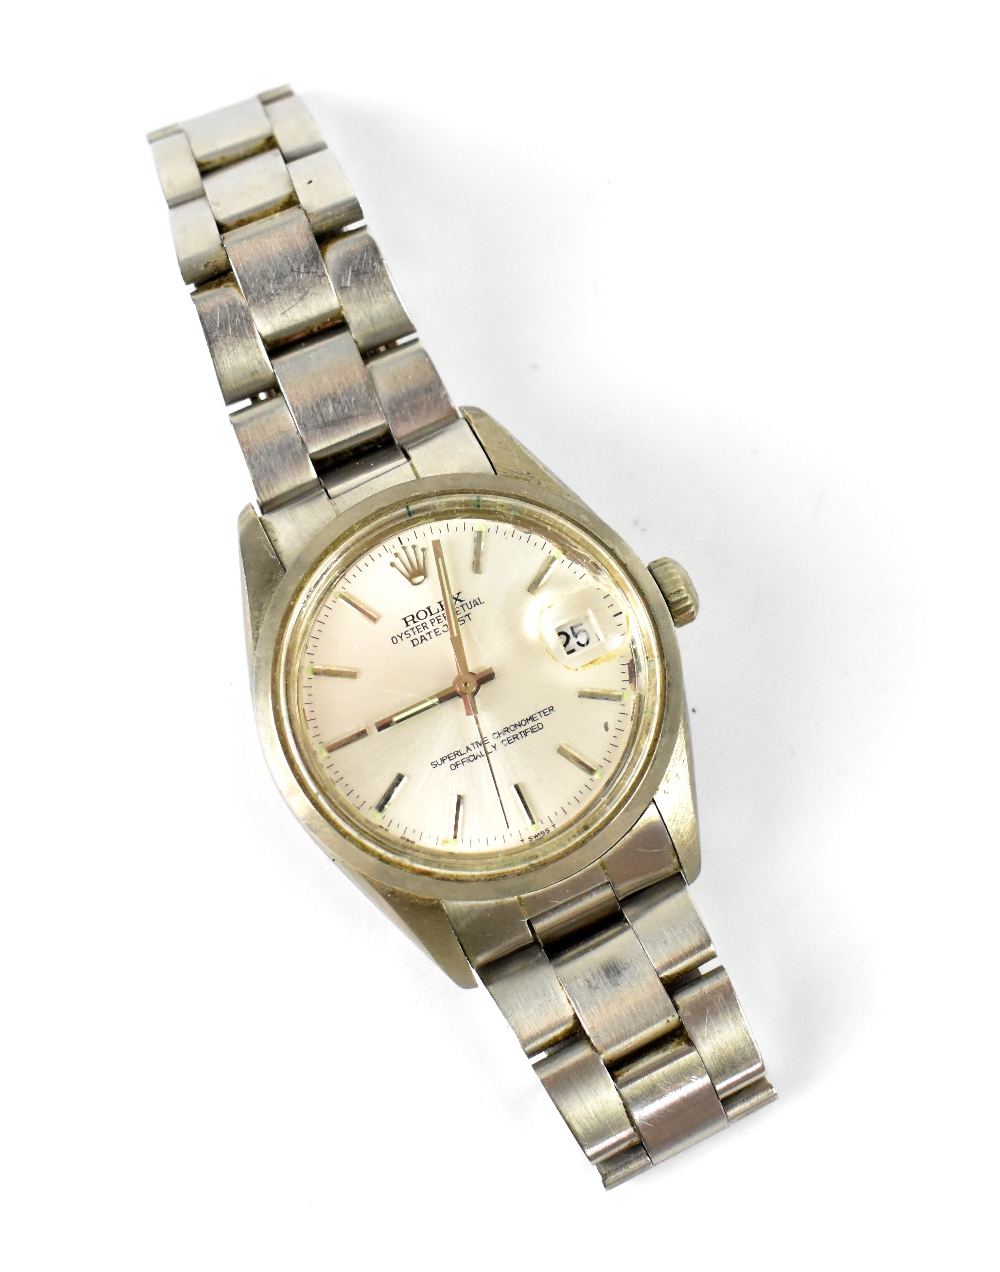 Withdrawn Rolex; a gentlemen's Oyster Perpetual Chronometer watch,